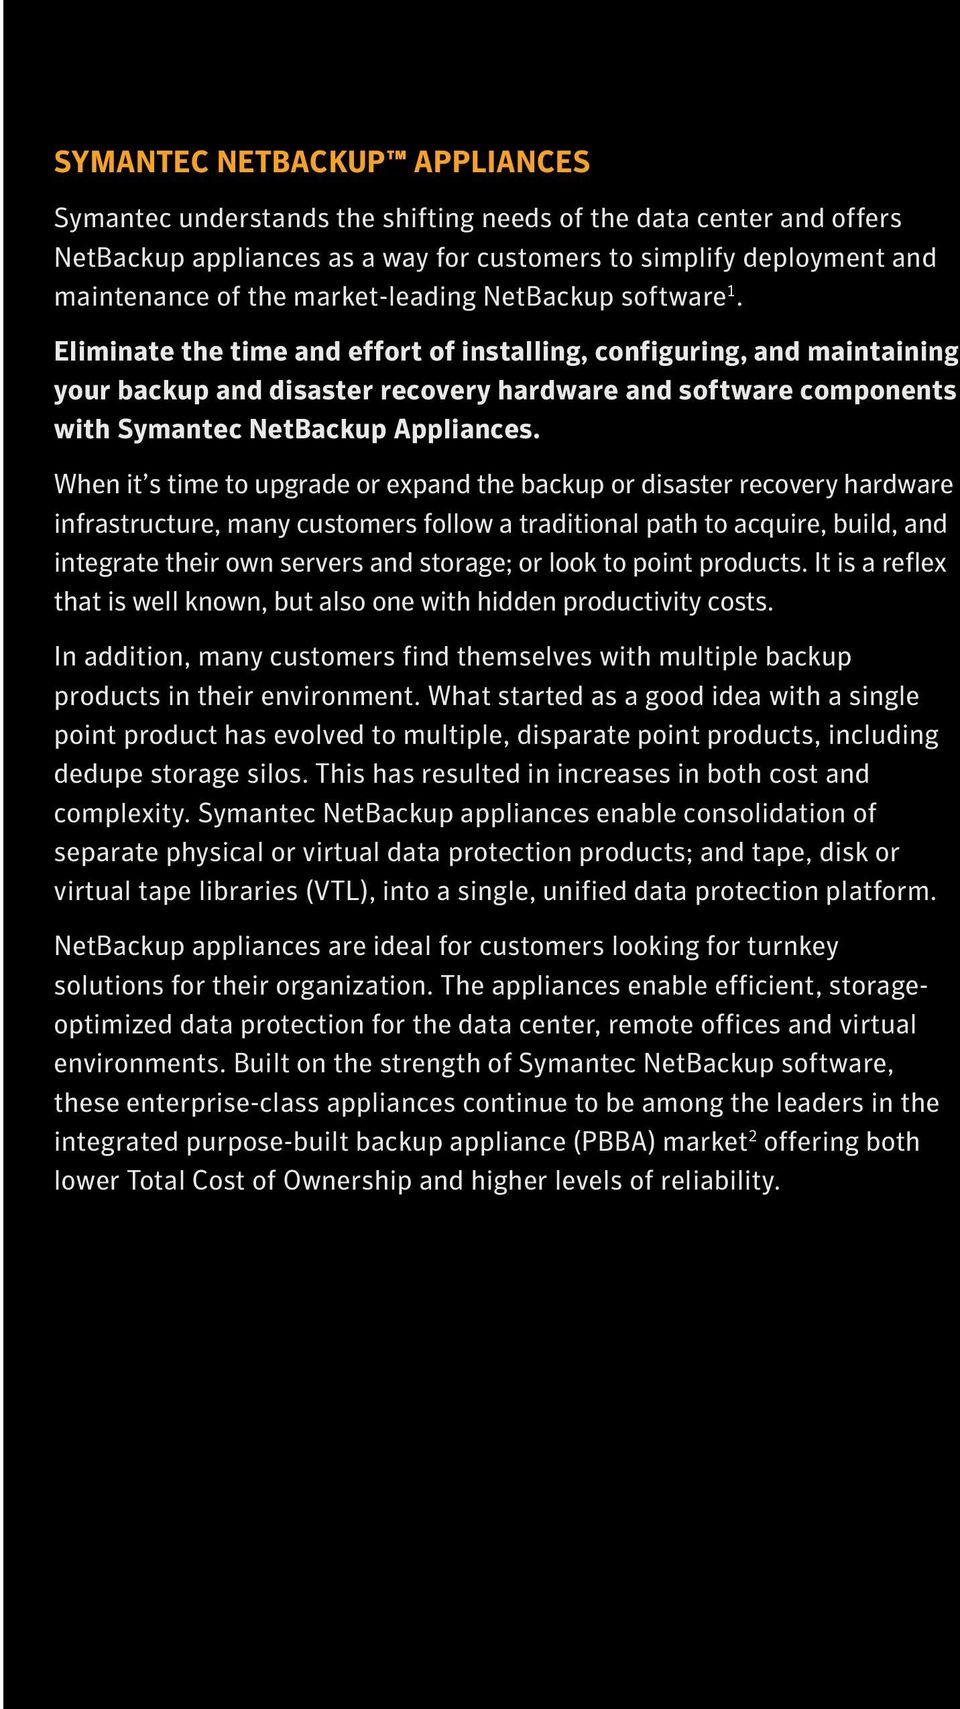 Eliminate the time and effort of installing, configuring, and maintaining your backup and disaster recovery hardware and software components with Symantec NetBackup Appliances.